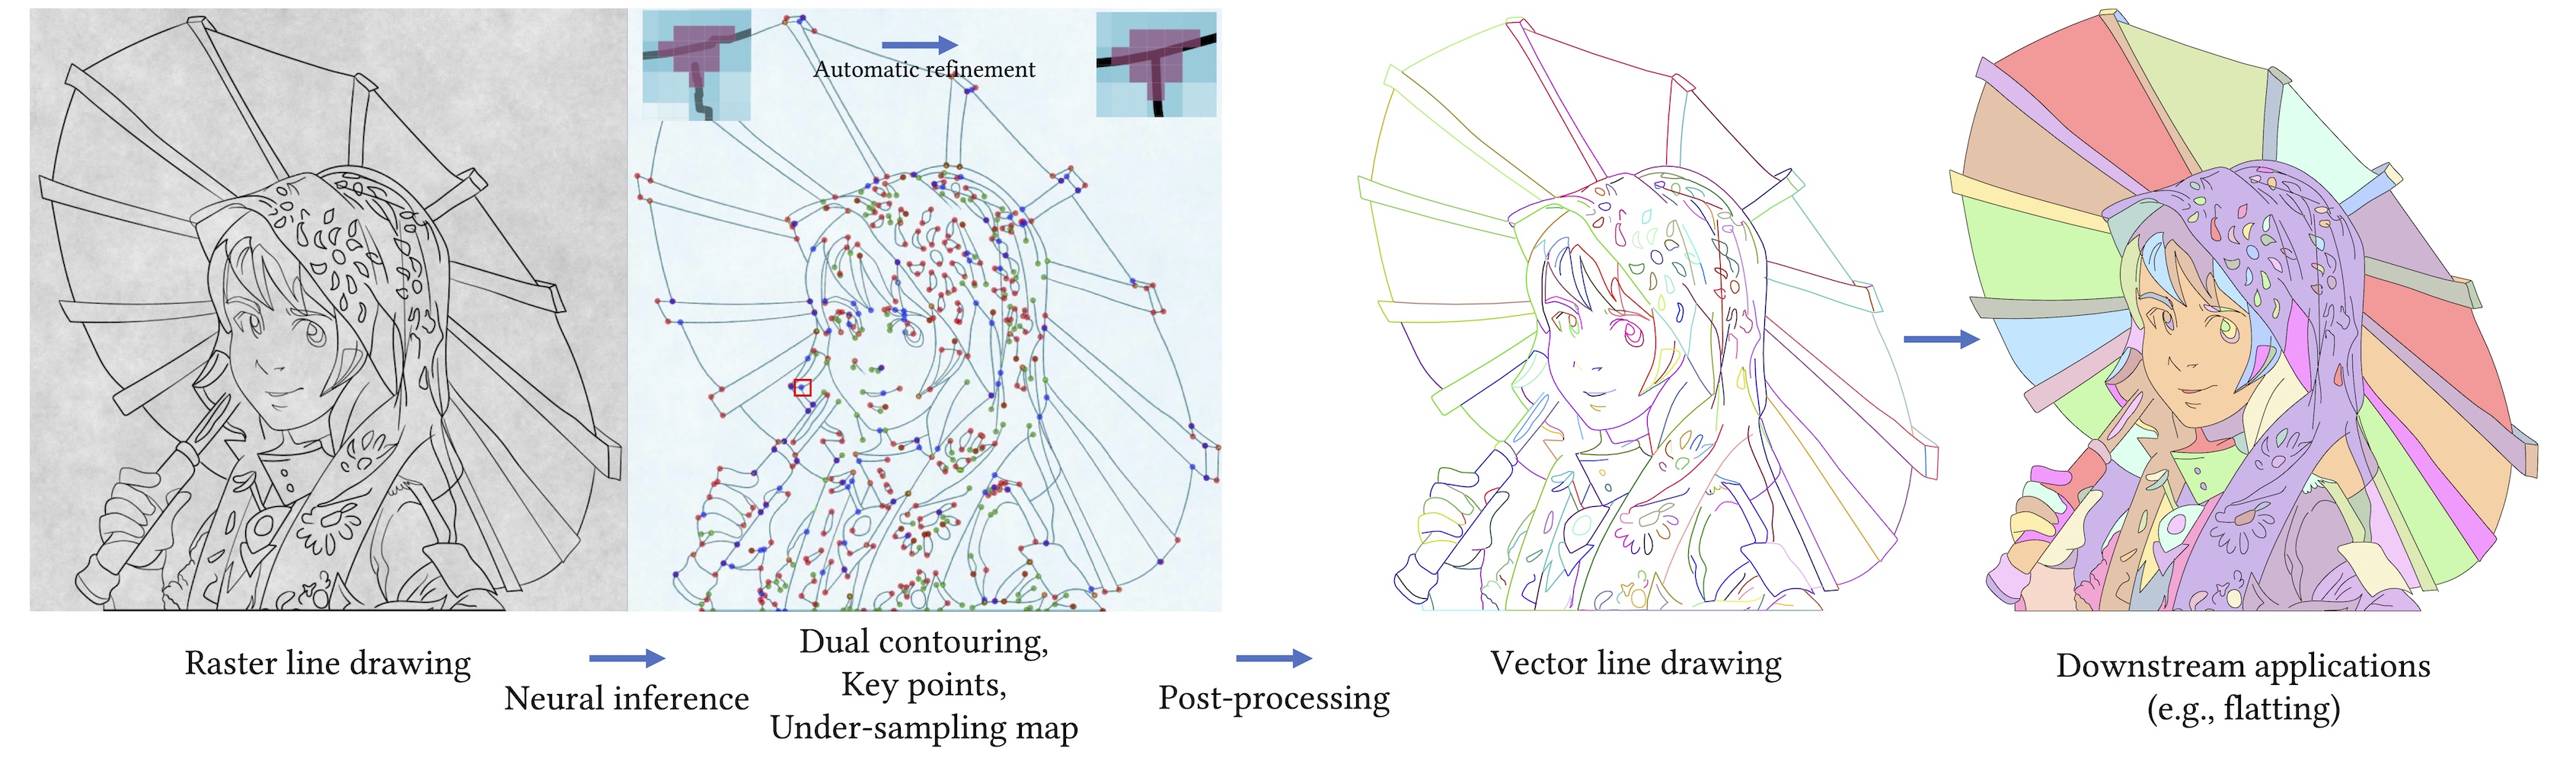 From left to right: A line drawing labeled A of a girl holding an umbrella over a grey background. The image is labeled Raster line drawing. An arrow labeled Neural inference. An image labeled B of the same girl with overlaid dots and small highlighted regions. The image is labeled Dual contouring, Key points, Under-sampling map. Inset is a small image of three bumpy lines meeting in a highlighted region with blue dot in the center. Inset is also an arrow labeled Automatic refinemenet pointing to a small image of the same lines with the bumps removed. An arrow labeled post-processing. An drawing labeled C of the same girl holding an umbrella. This time, the background is white and the lines in the drawing are each a different color. An image labeled D of the same girl holding an umbrella. This time each part of the drawing is filled with a different solid color. The image is labeled Downstream applications (e.g., flatting).